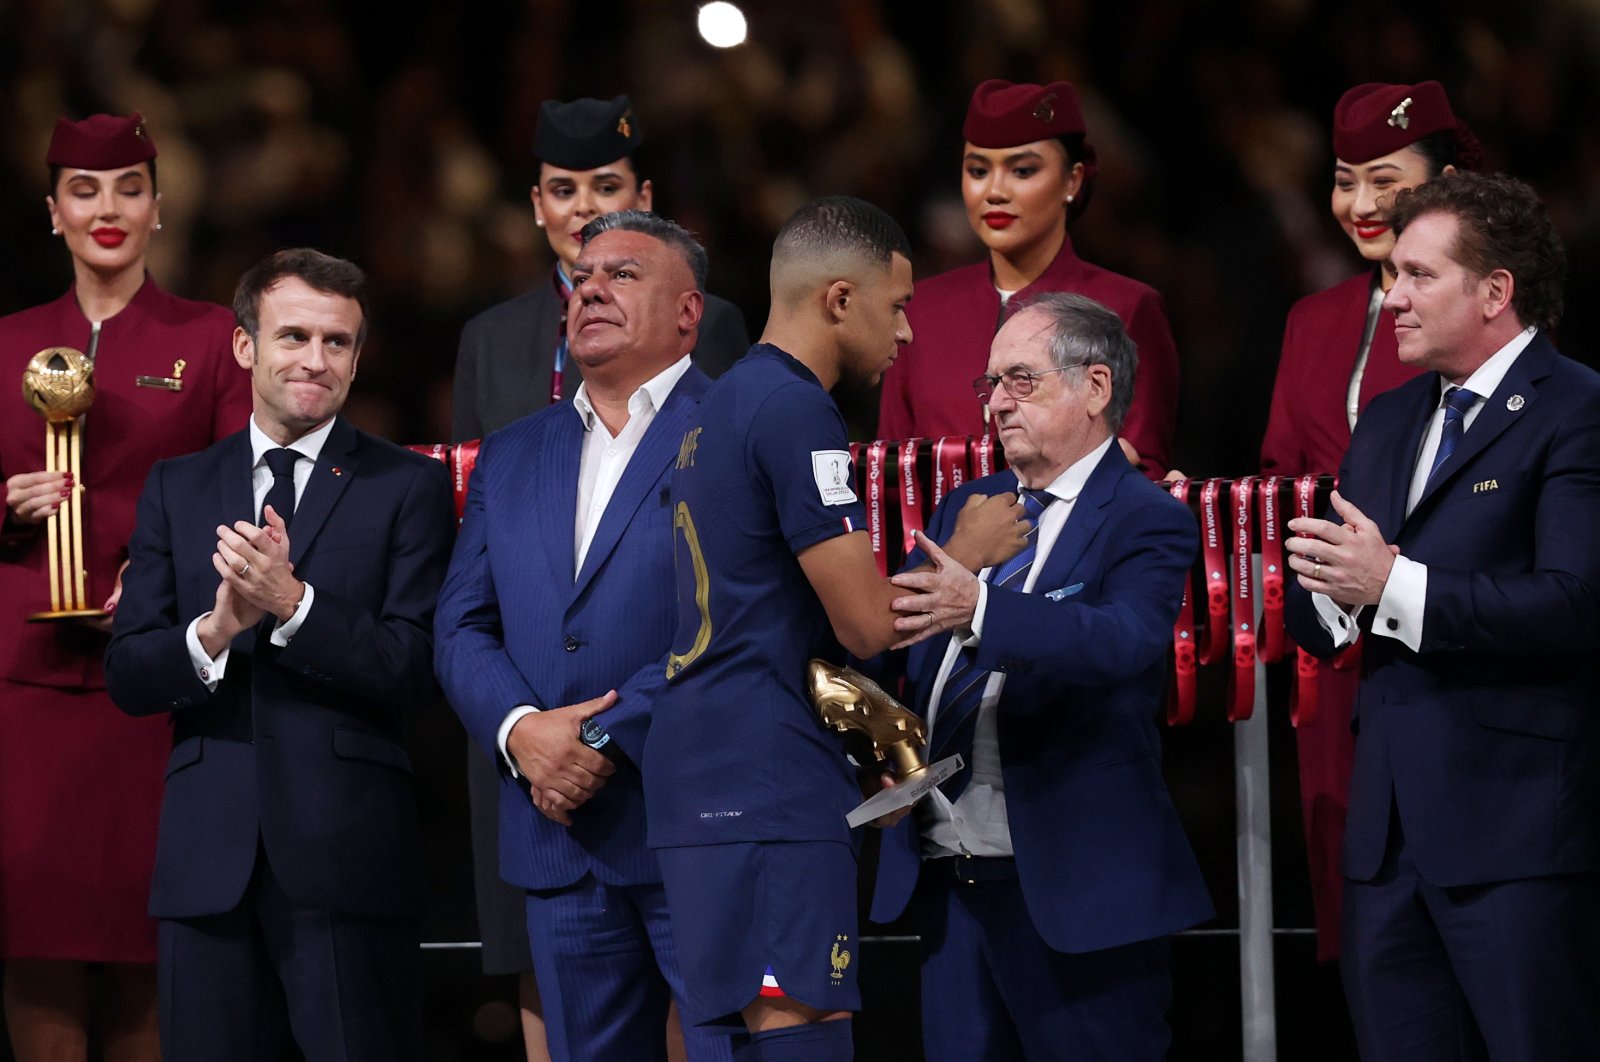 French Football Federation President Noel Le Graet congratulates Kylian Mbappe during the awards ceremony after the FIFA World Cup Qatar 2022 final match between Argentina and France at Lusail Stadium, Lusail City, Qatar, Dec. 18, 2022. (Getty Images Photo)